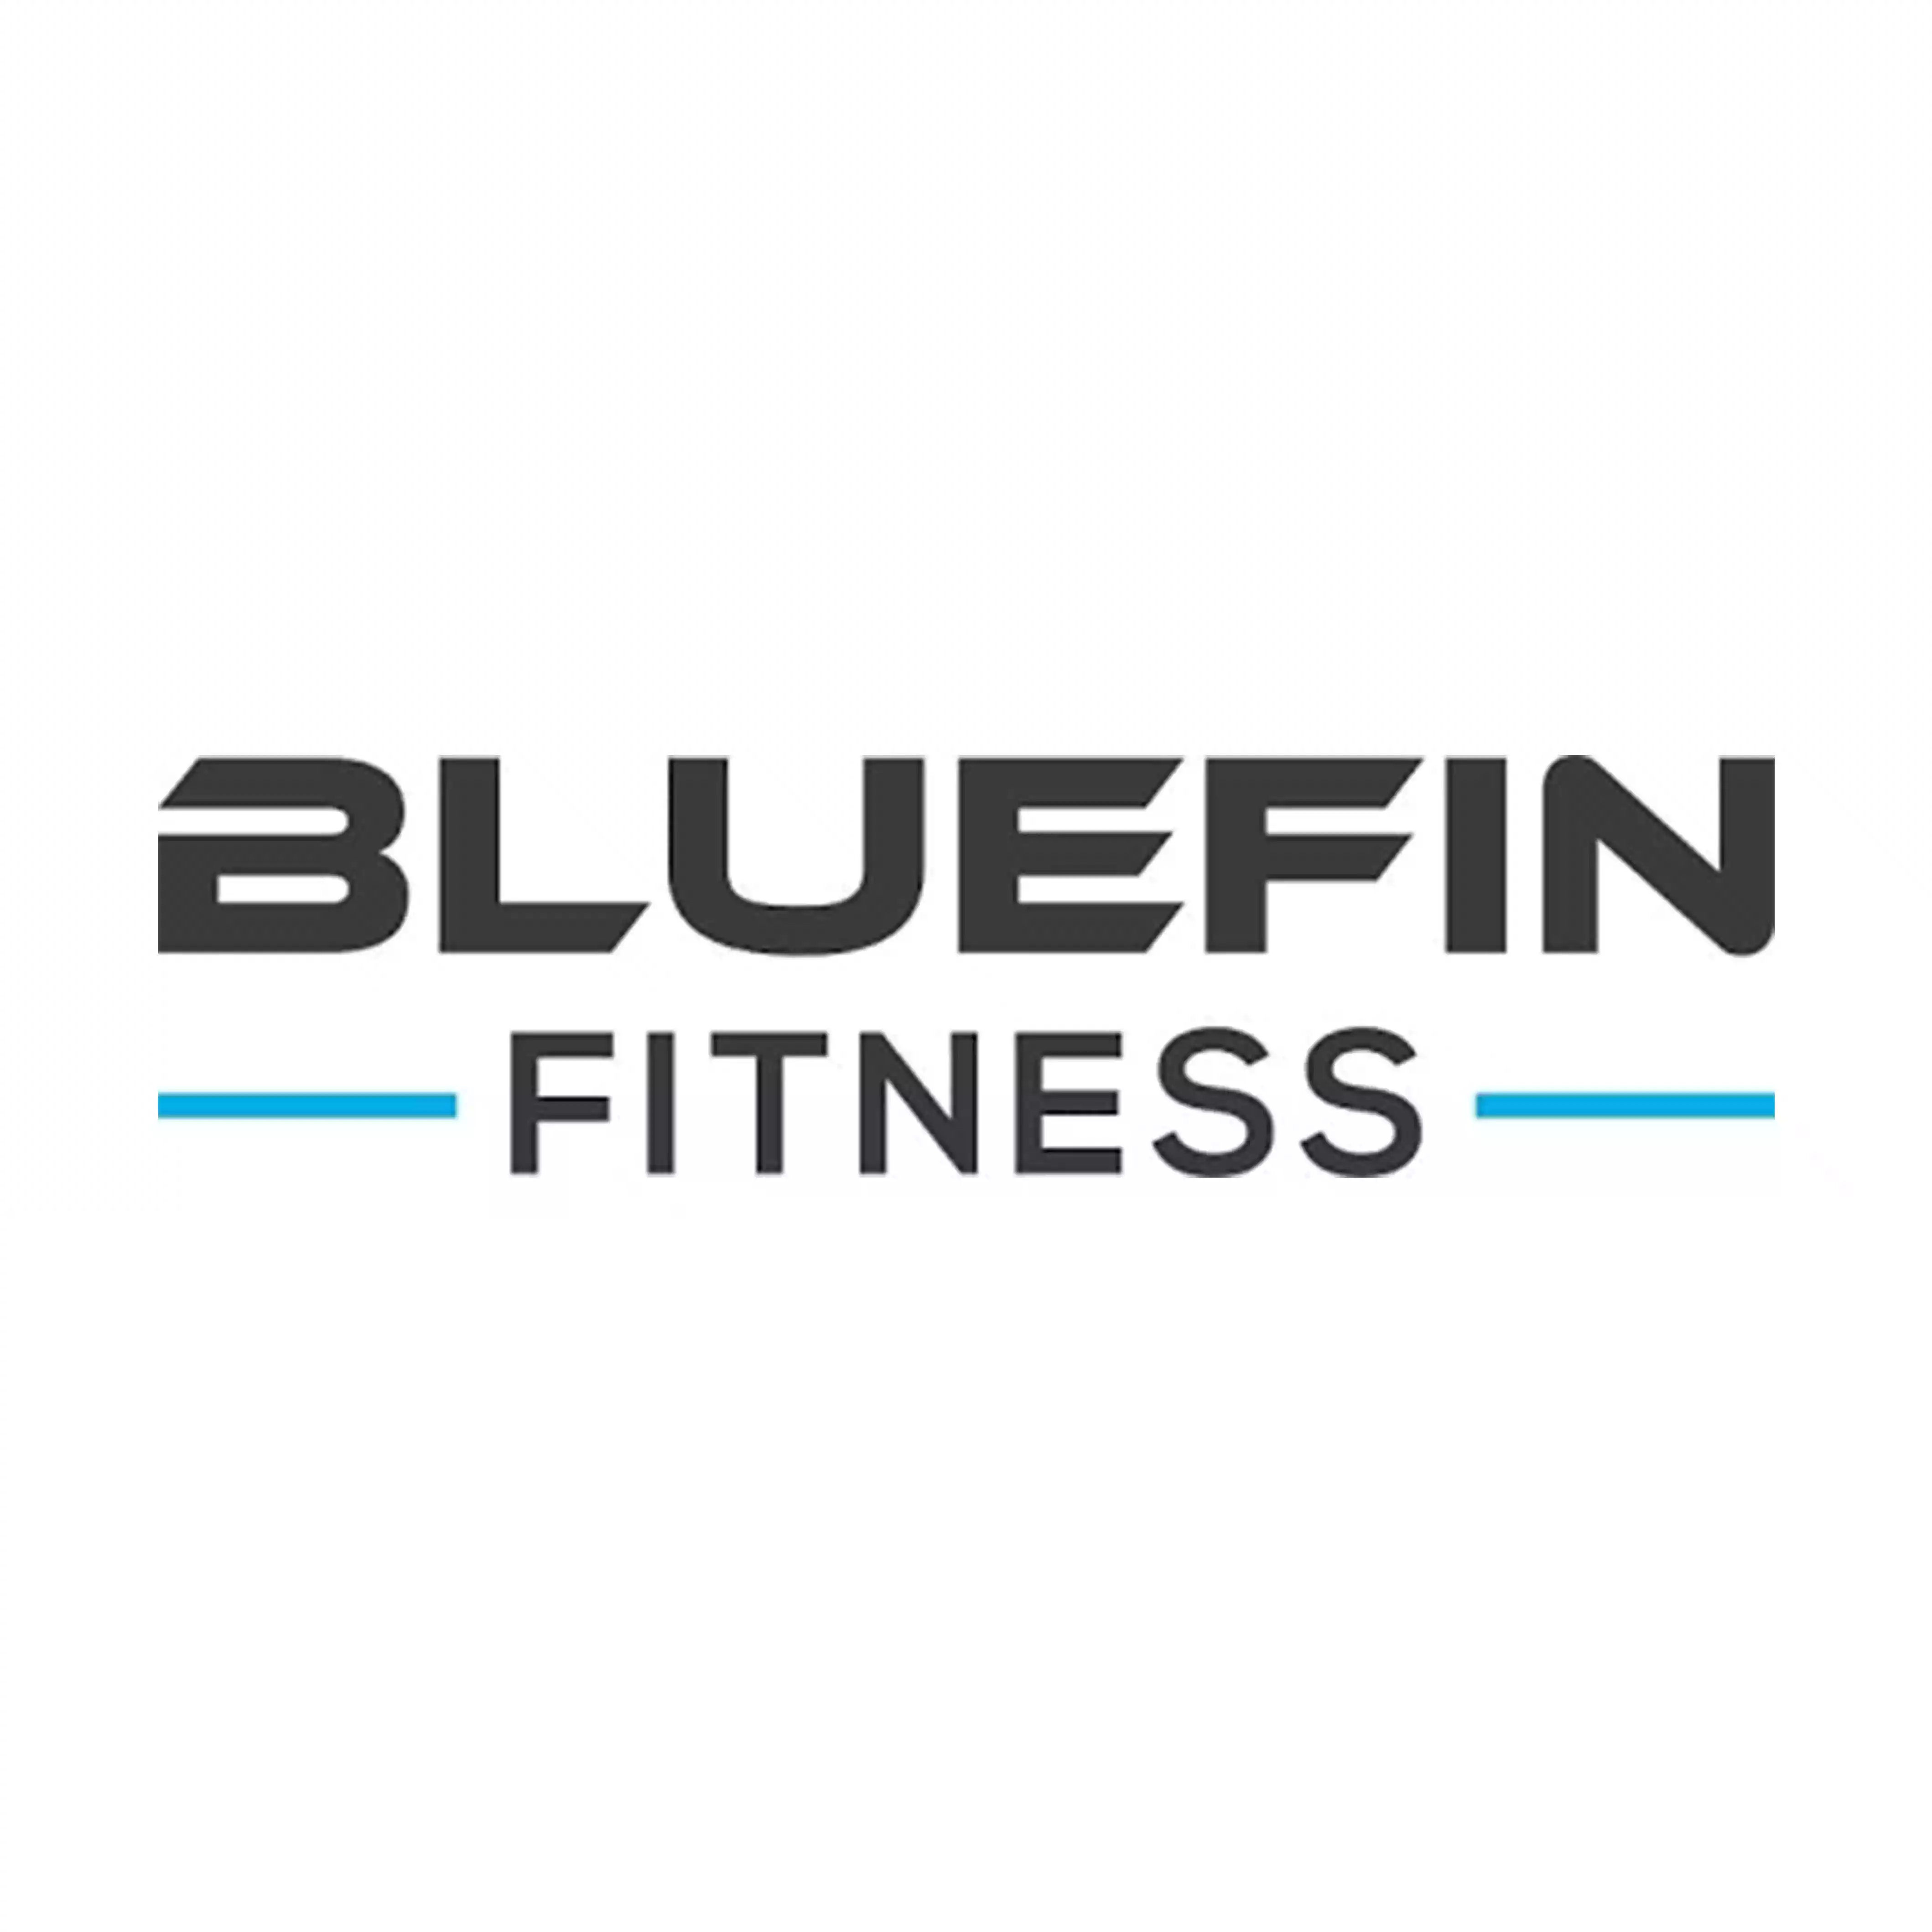 Bluefin Fitness discount codes